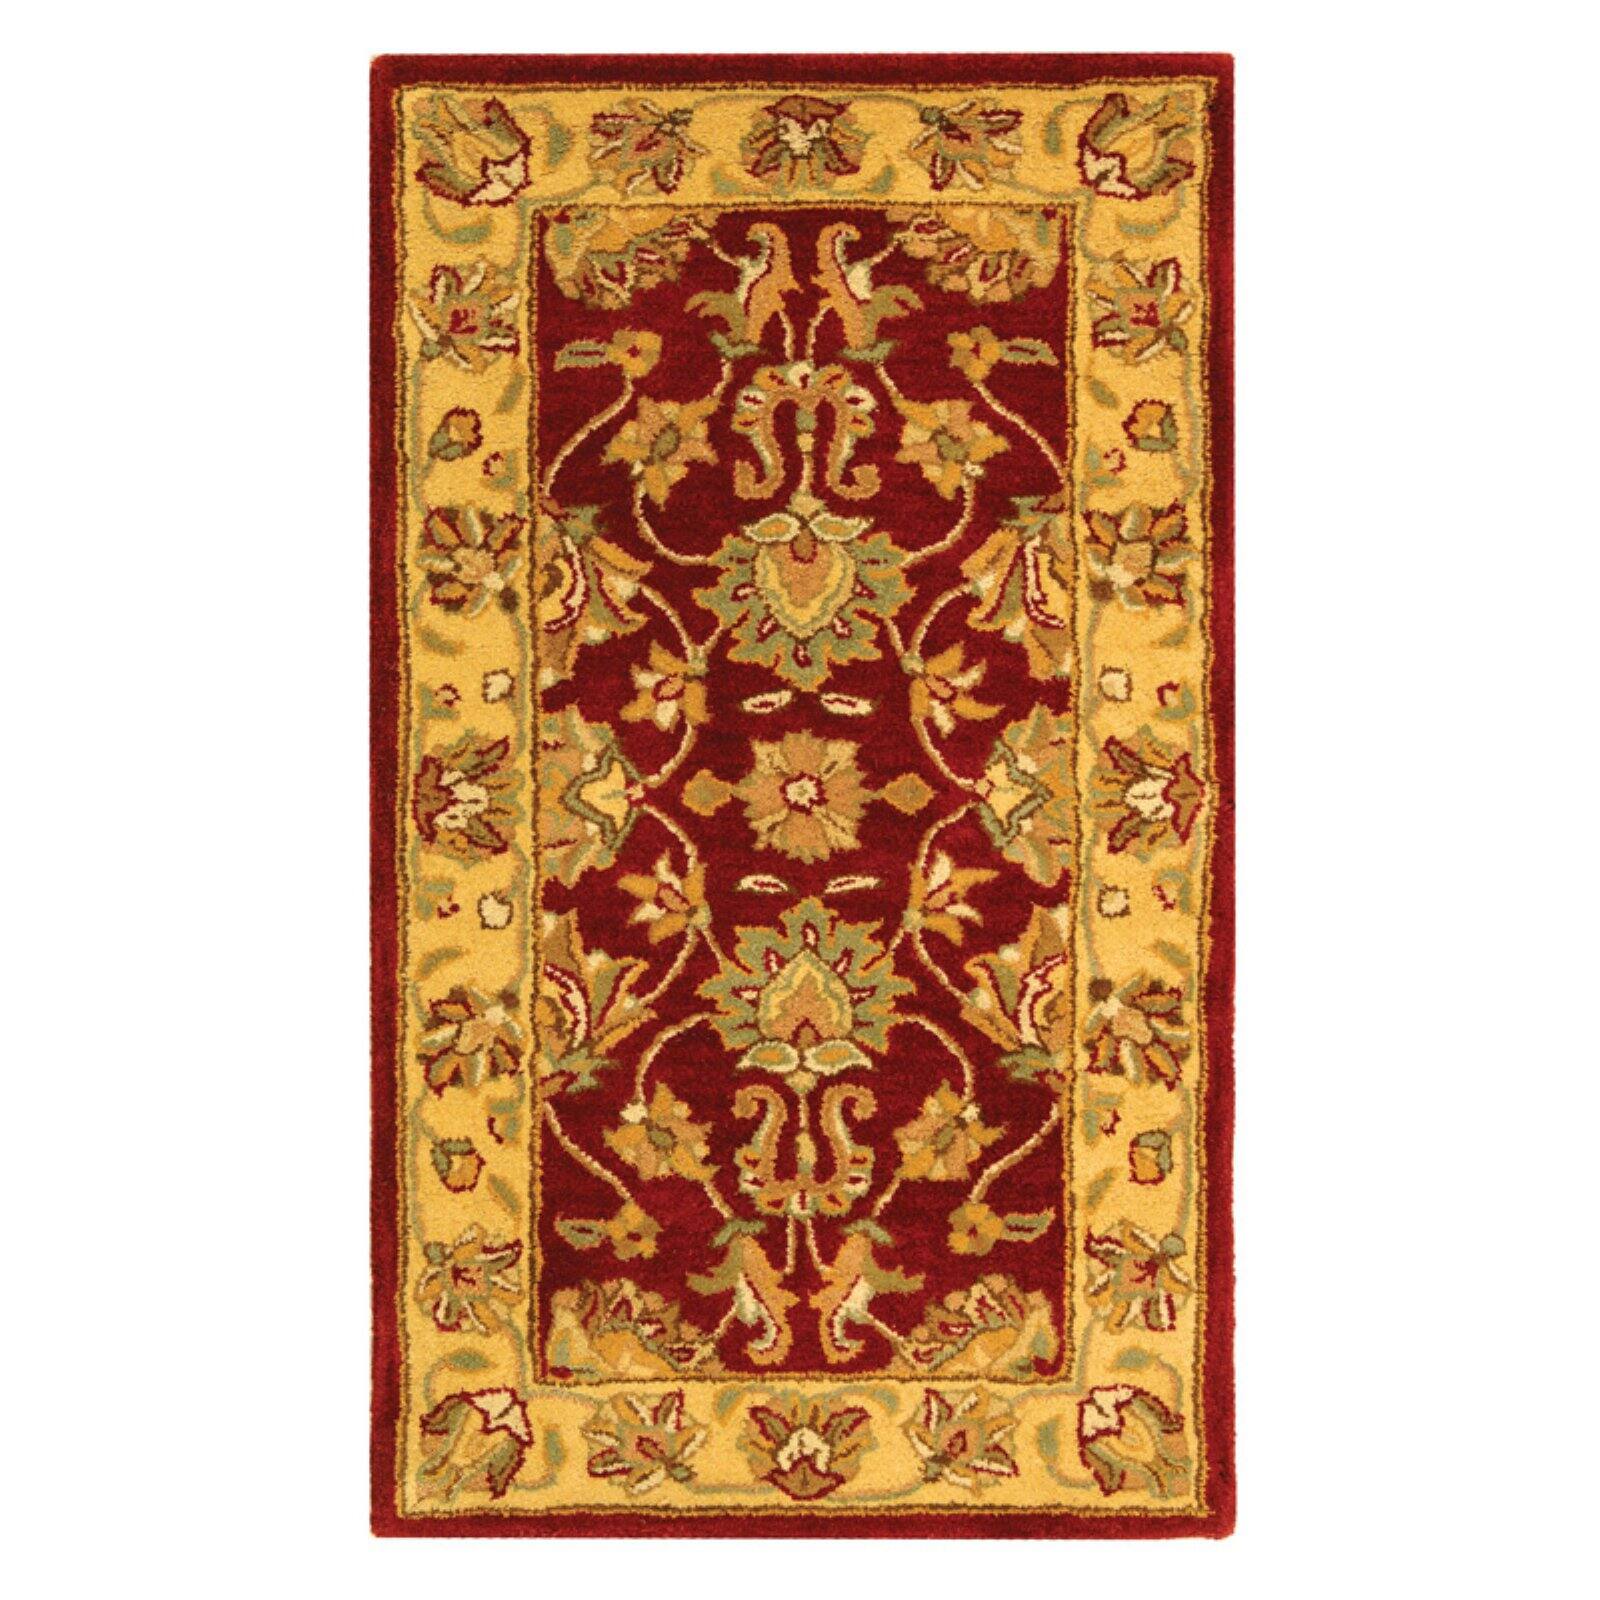 SAFAVIEH Heritage Regis Traditional Wool Area Rug, Red/Gold, 6' x 6' Round - image 2 of 9